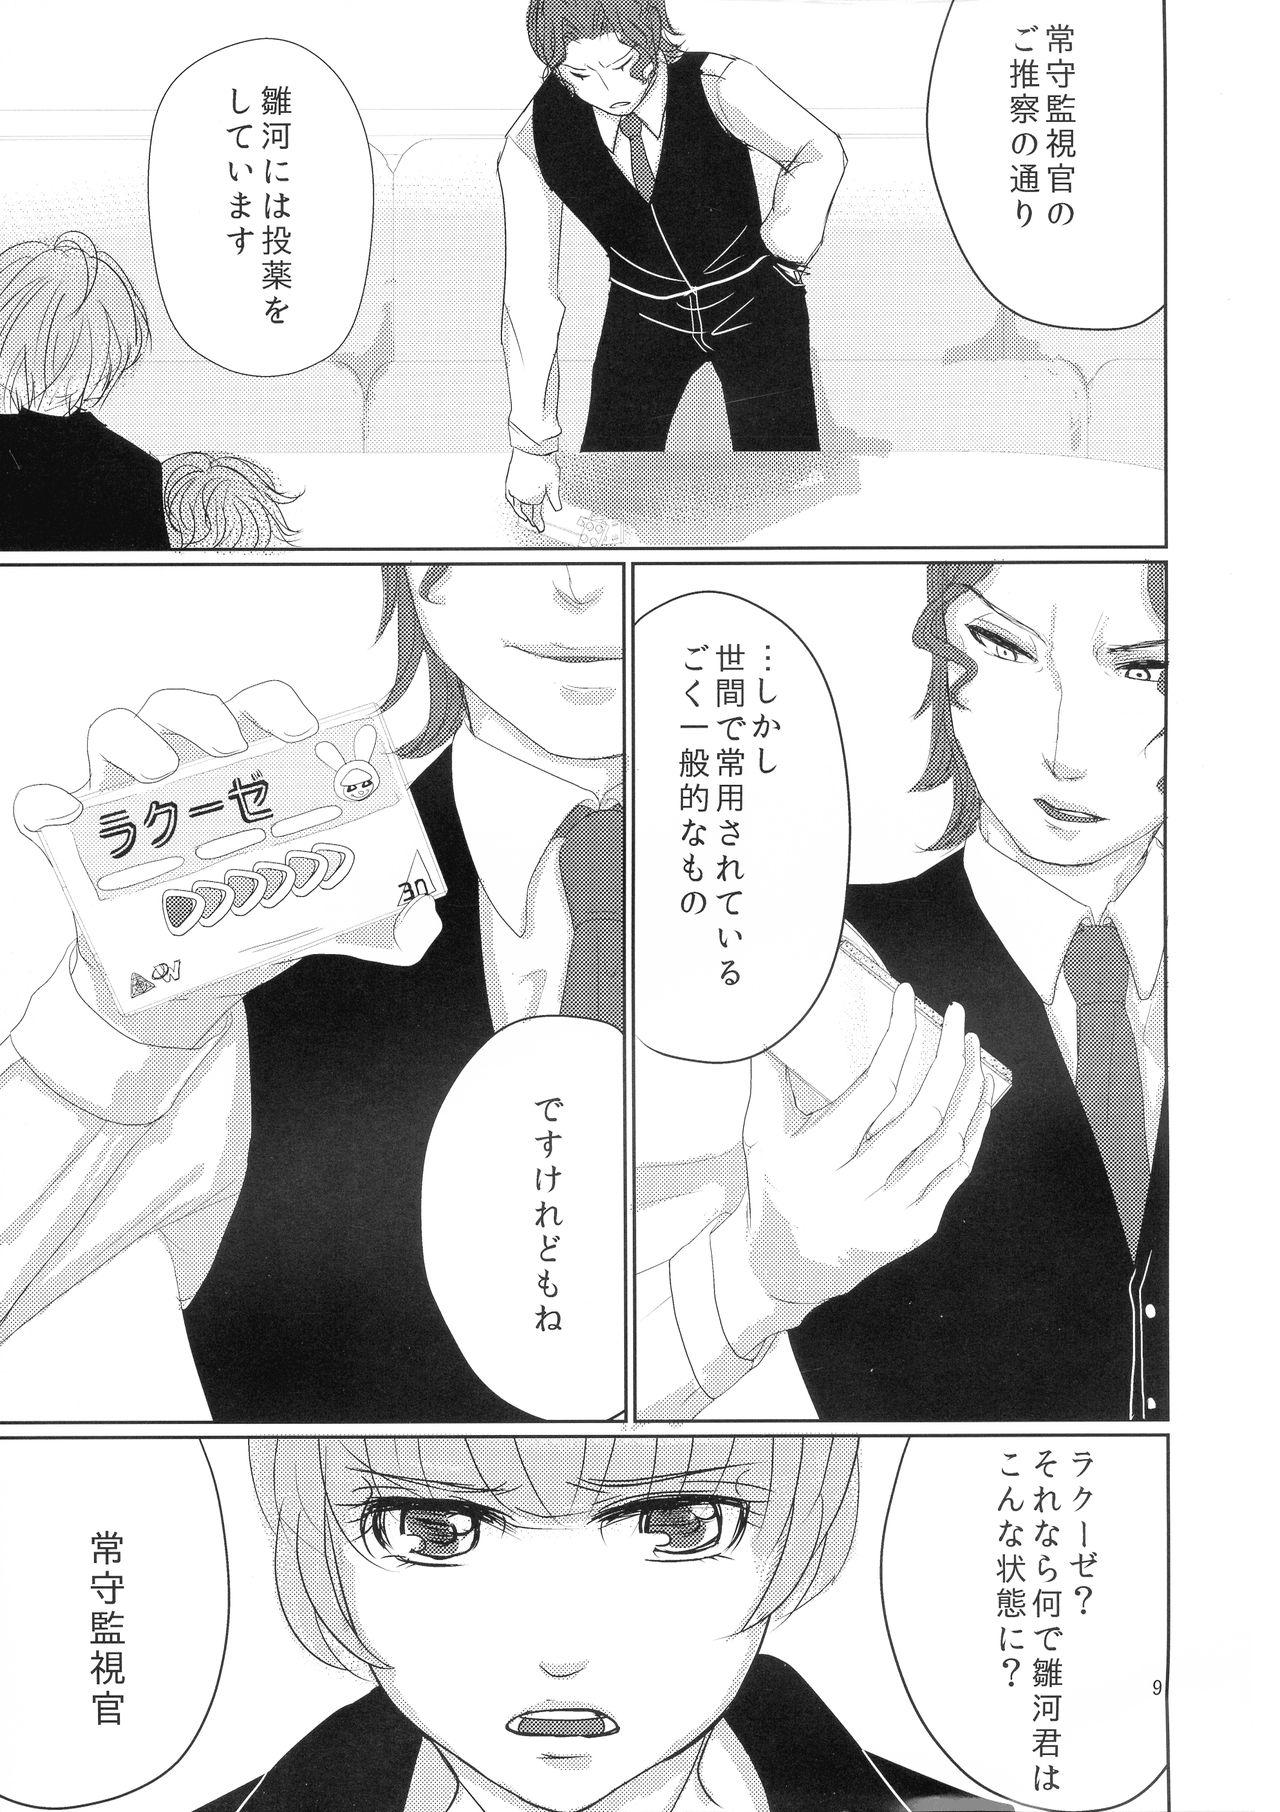 Bizarre CSD - Psycho-pass Topless - Page 9